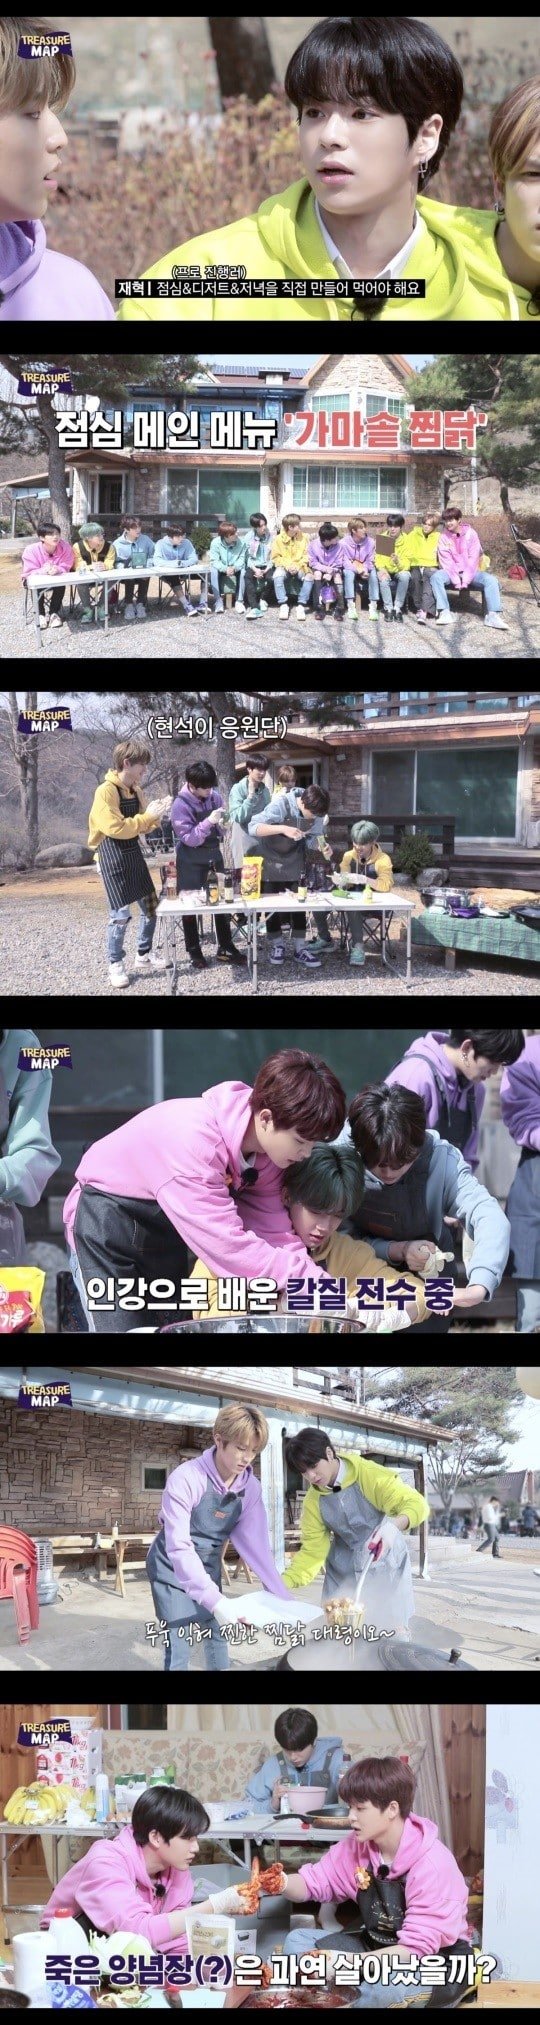 YG’s Rookie Group TREASURE Challenges on Making Healthy Food… Shares Appreciation Towards Their Parents